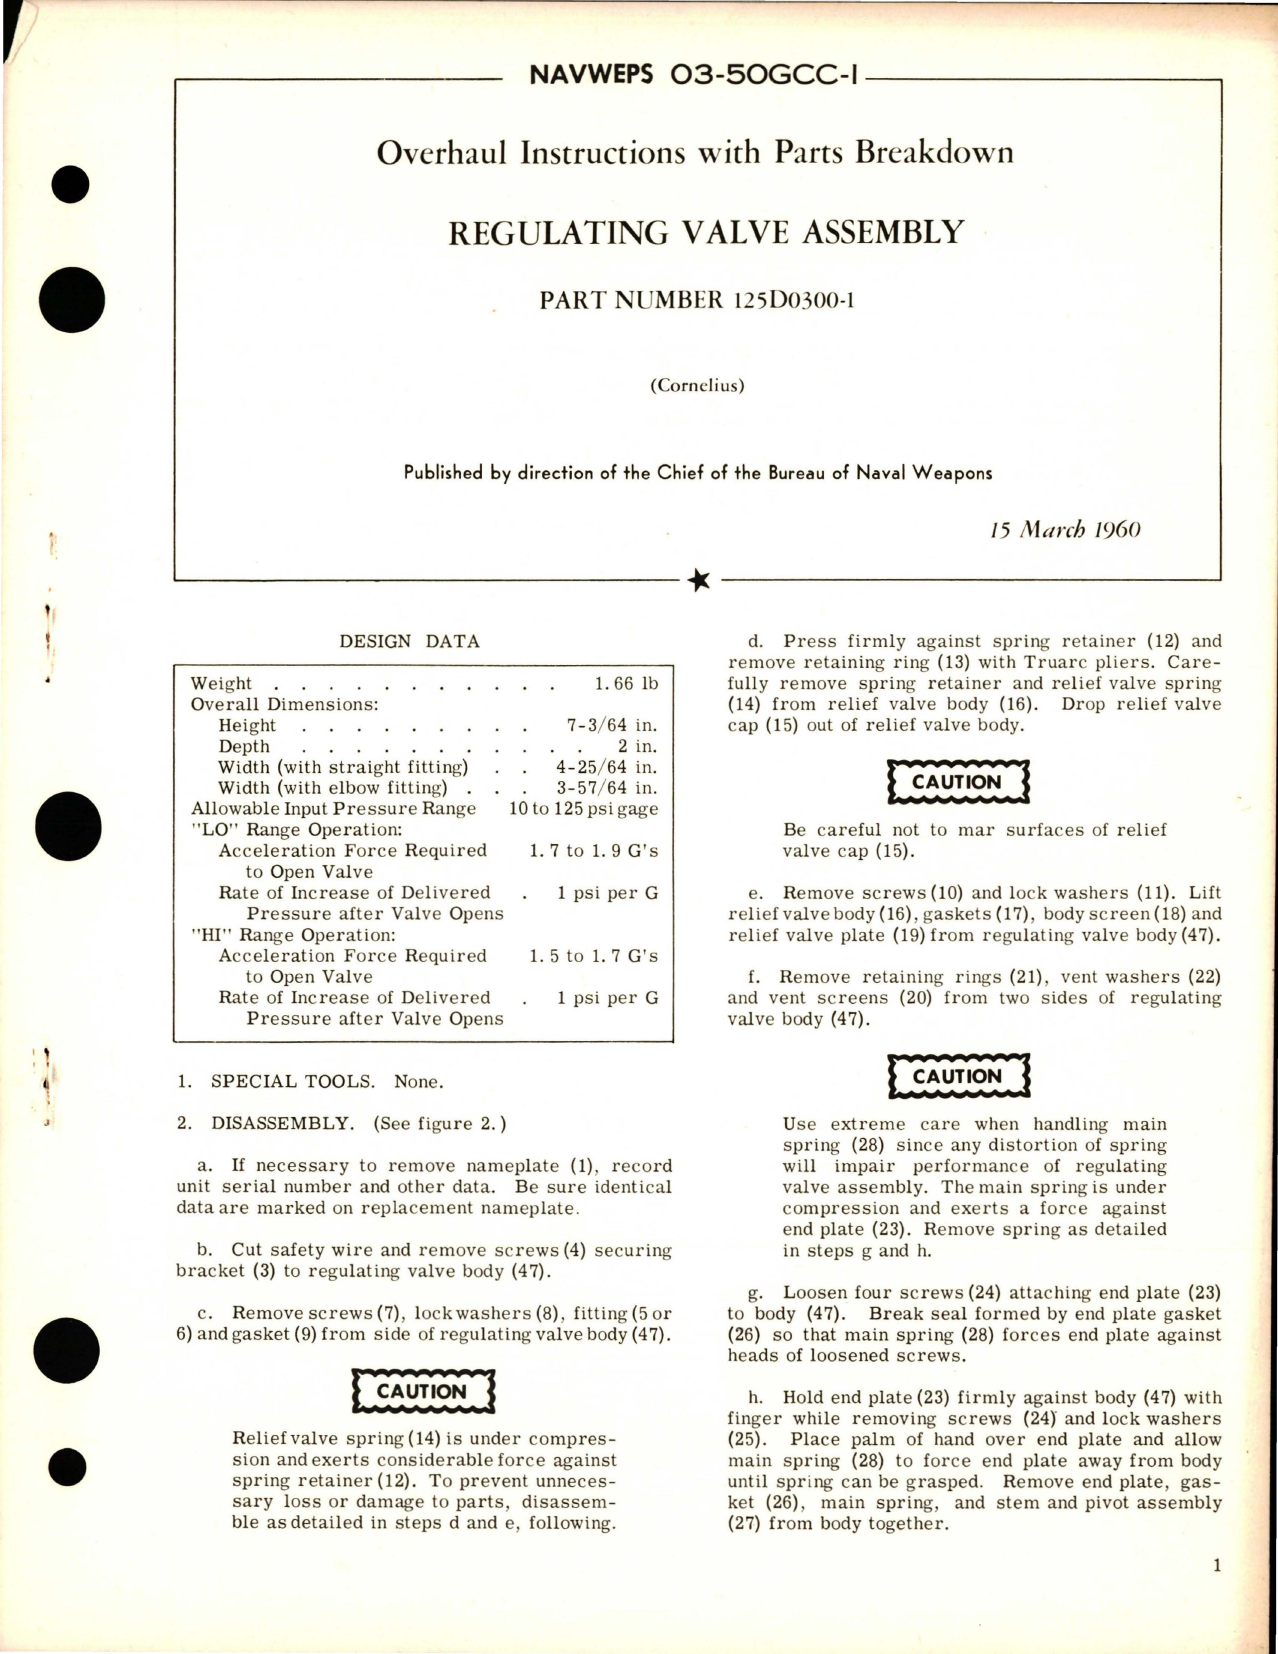 Sample page 1 from AirCorps Library document: Overhaul Instructions with Parts Breakdown for Regulating Valve Assembly - Part 125D0300-1 